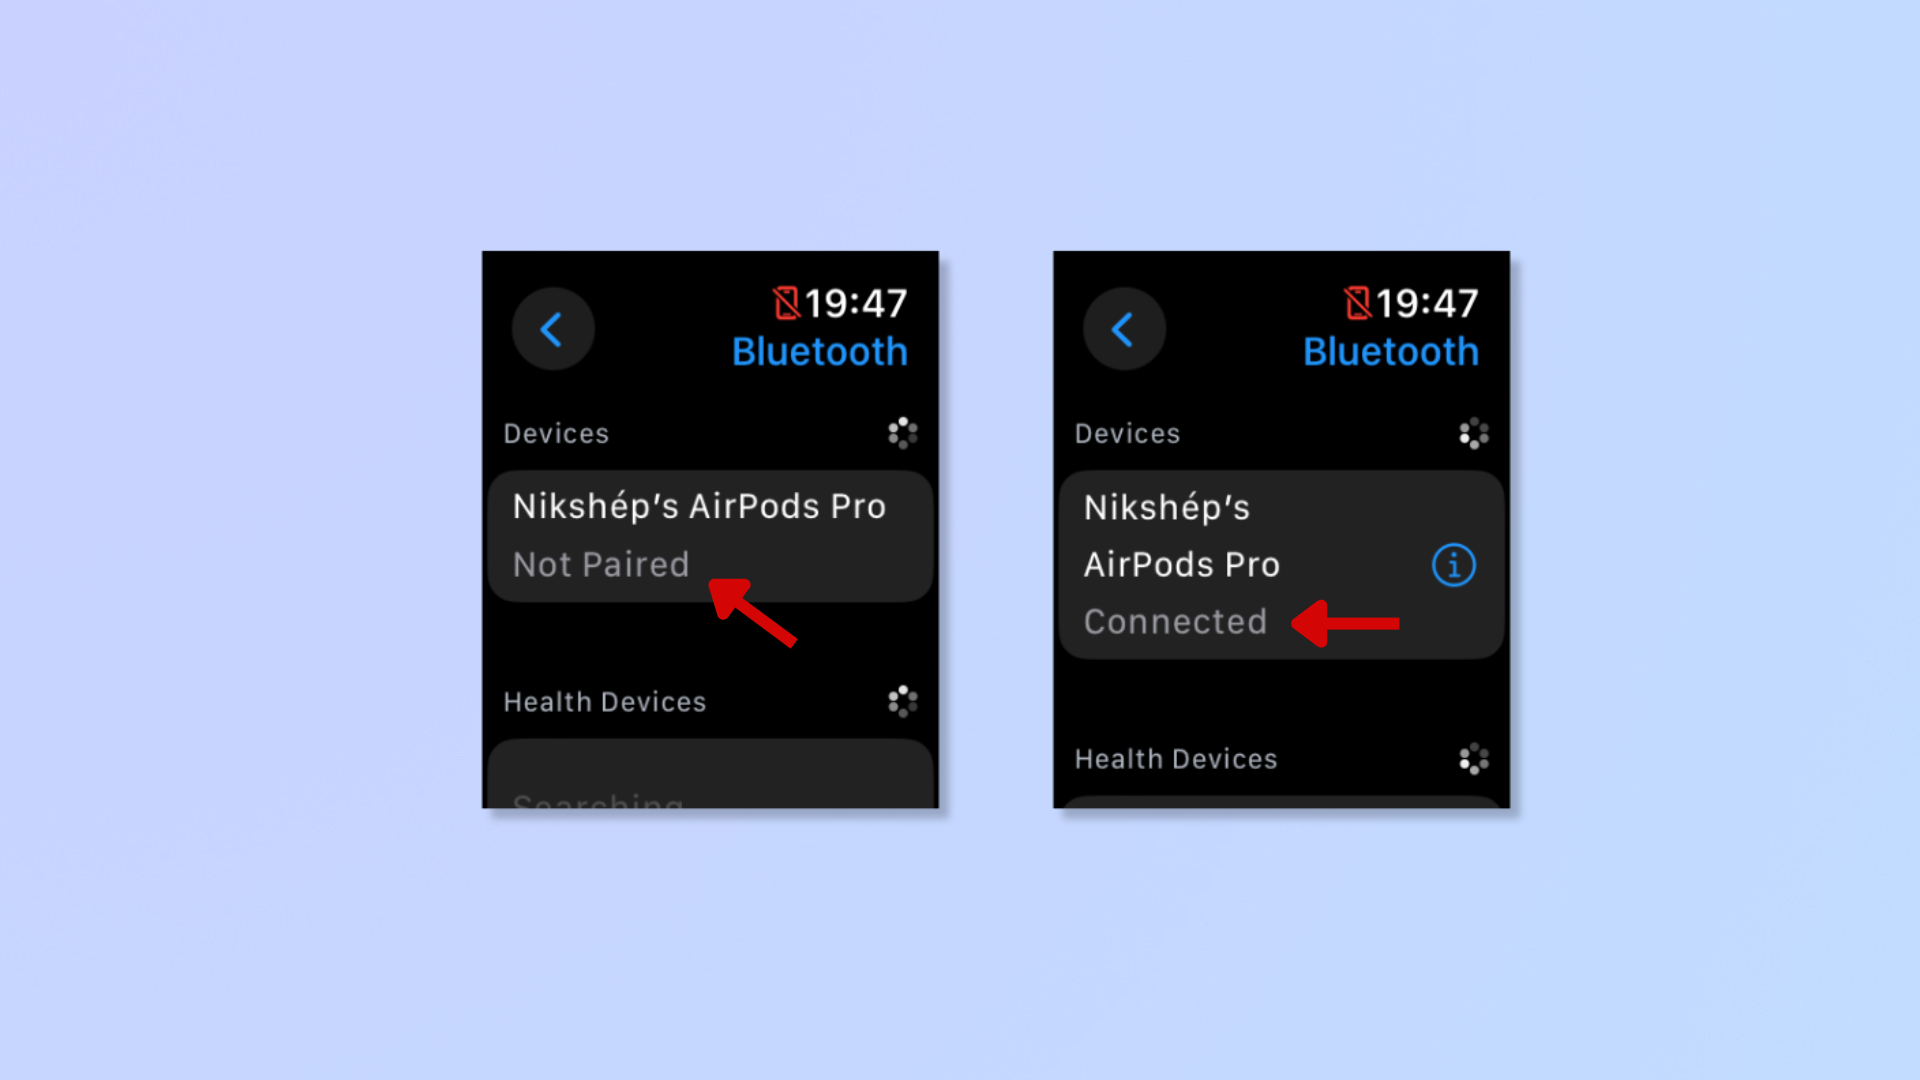 The first screenshot shows the devices appearing under Bluetooth, with a red arrow pointing at an unpaired pair of AirPods. The second screenshot shows the devices appearing under Bluetooth, with a red arrow pointing at the connected AirPods. 